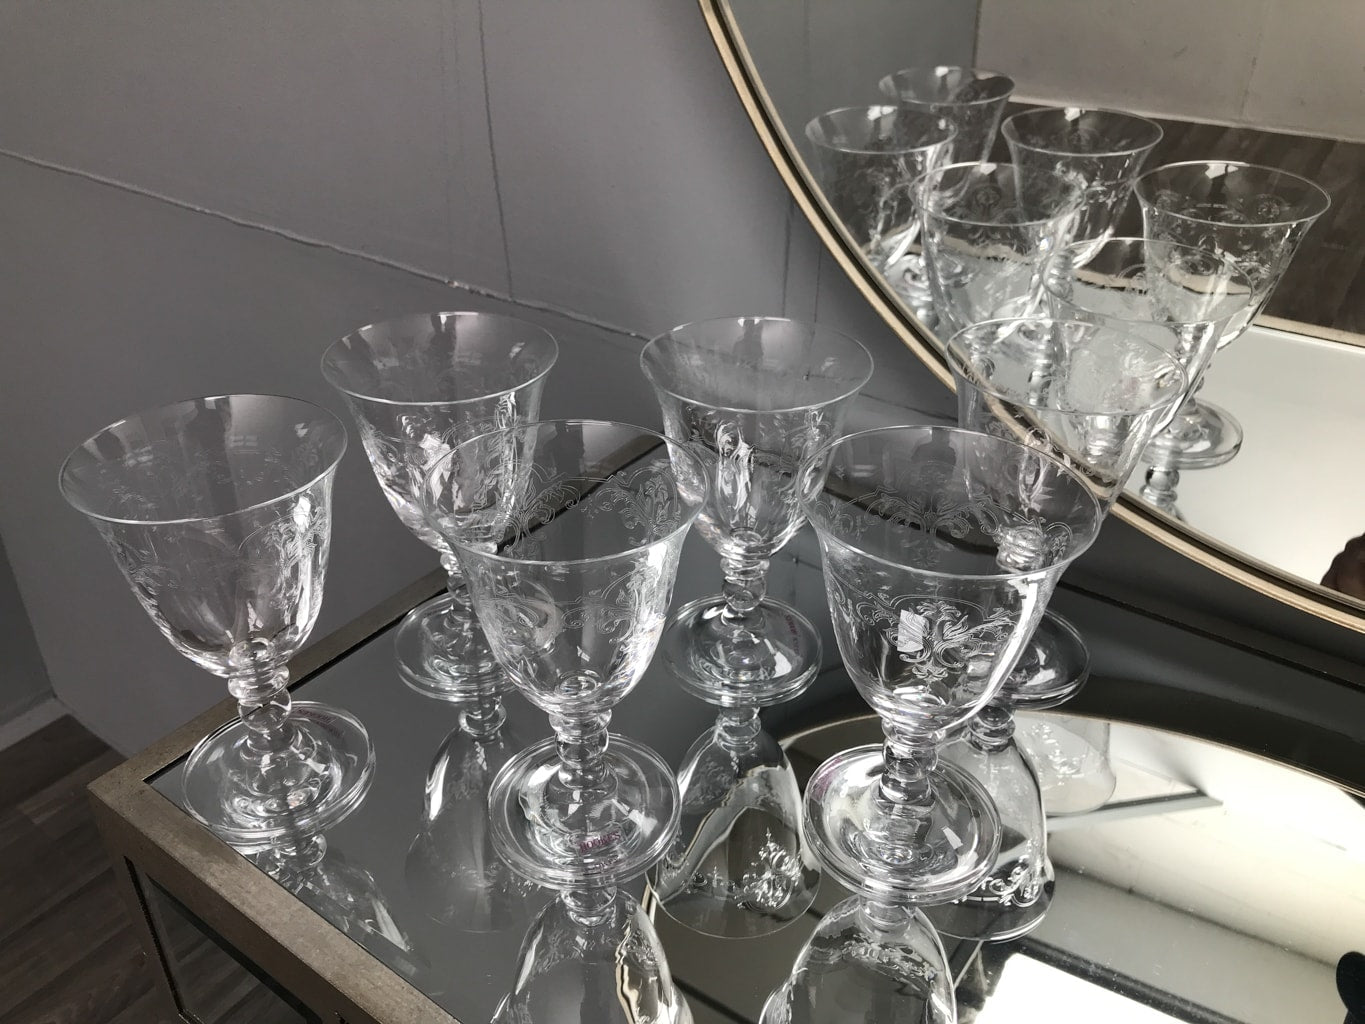 Piano Wine Glasses - Set of 6 Engraved